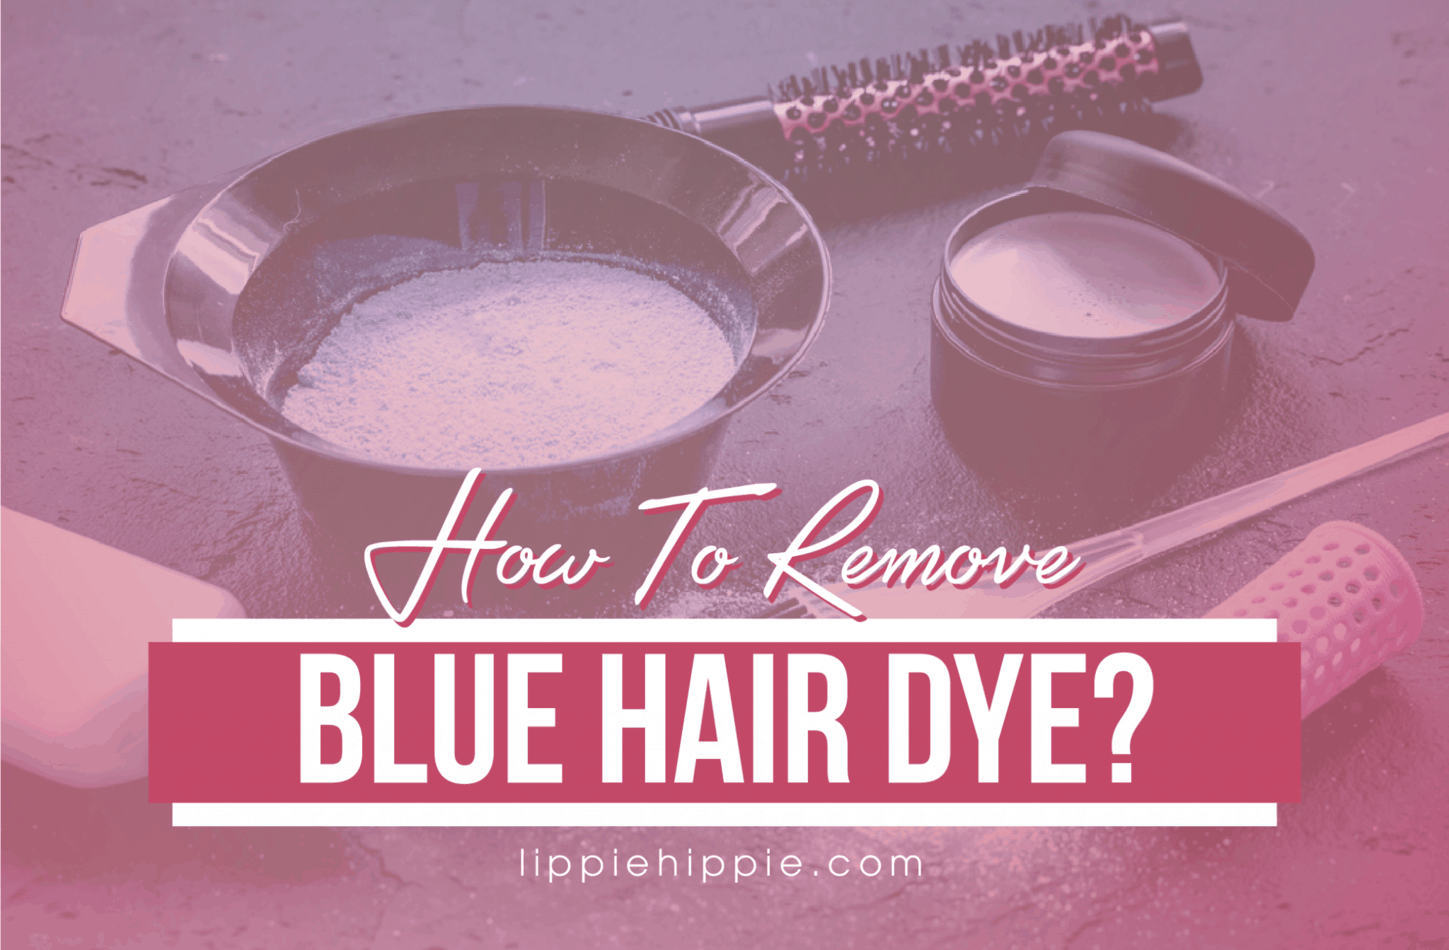 How to Remove Blue Hair Dye Safely - wide 6